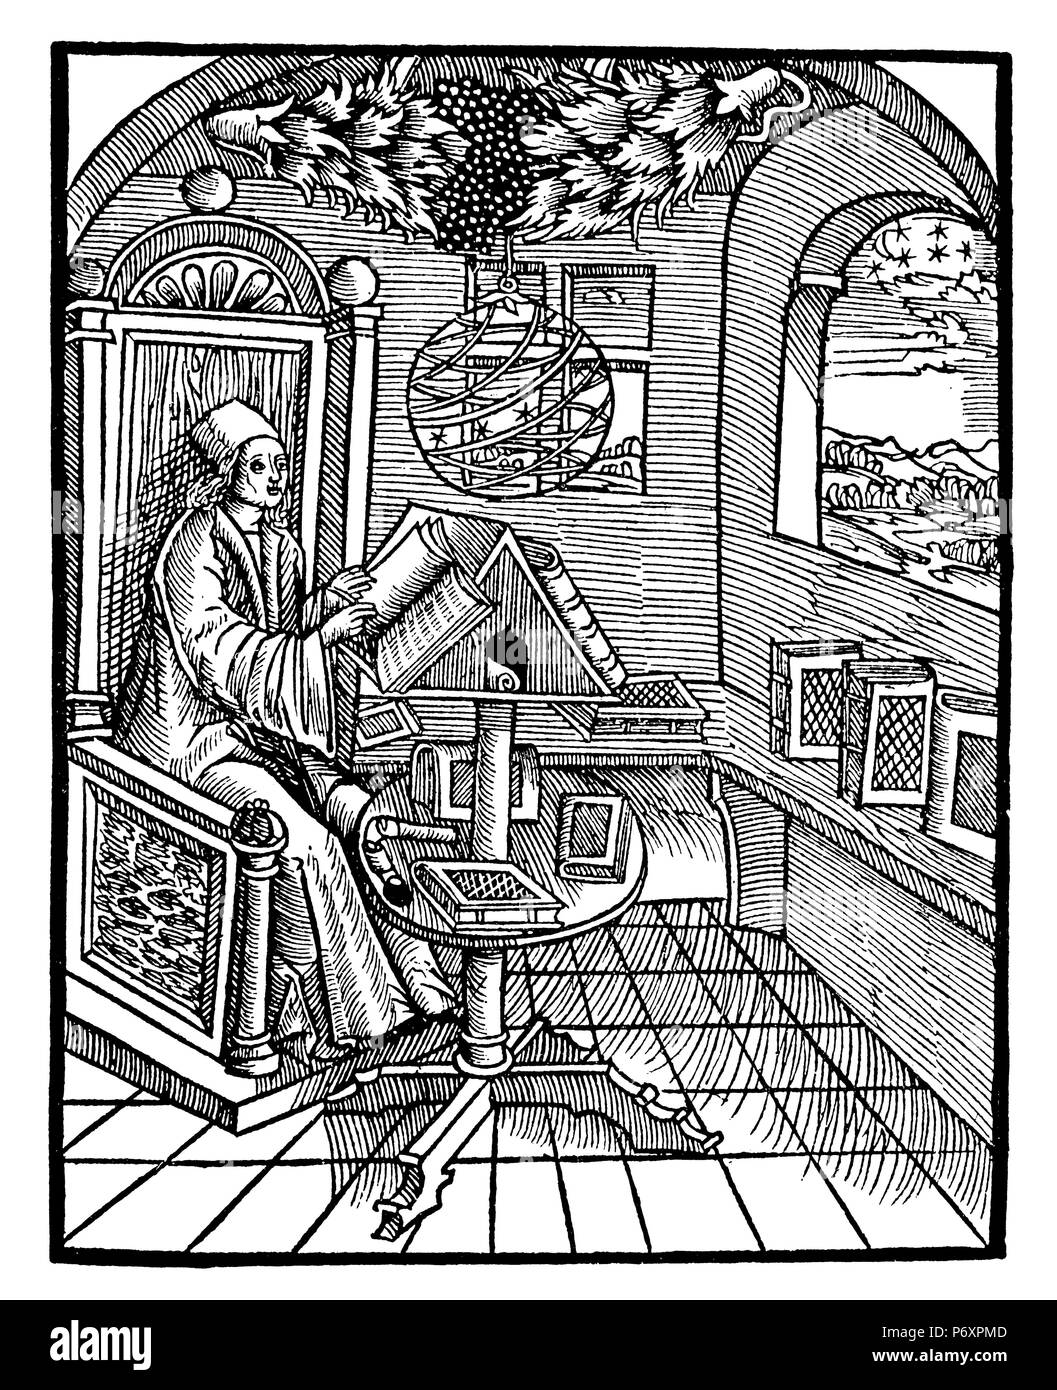 Interior Around 1500 Room Of A Scholar Working In